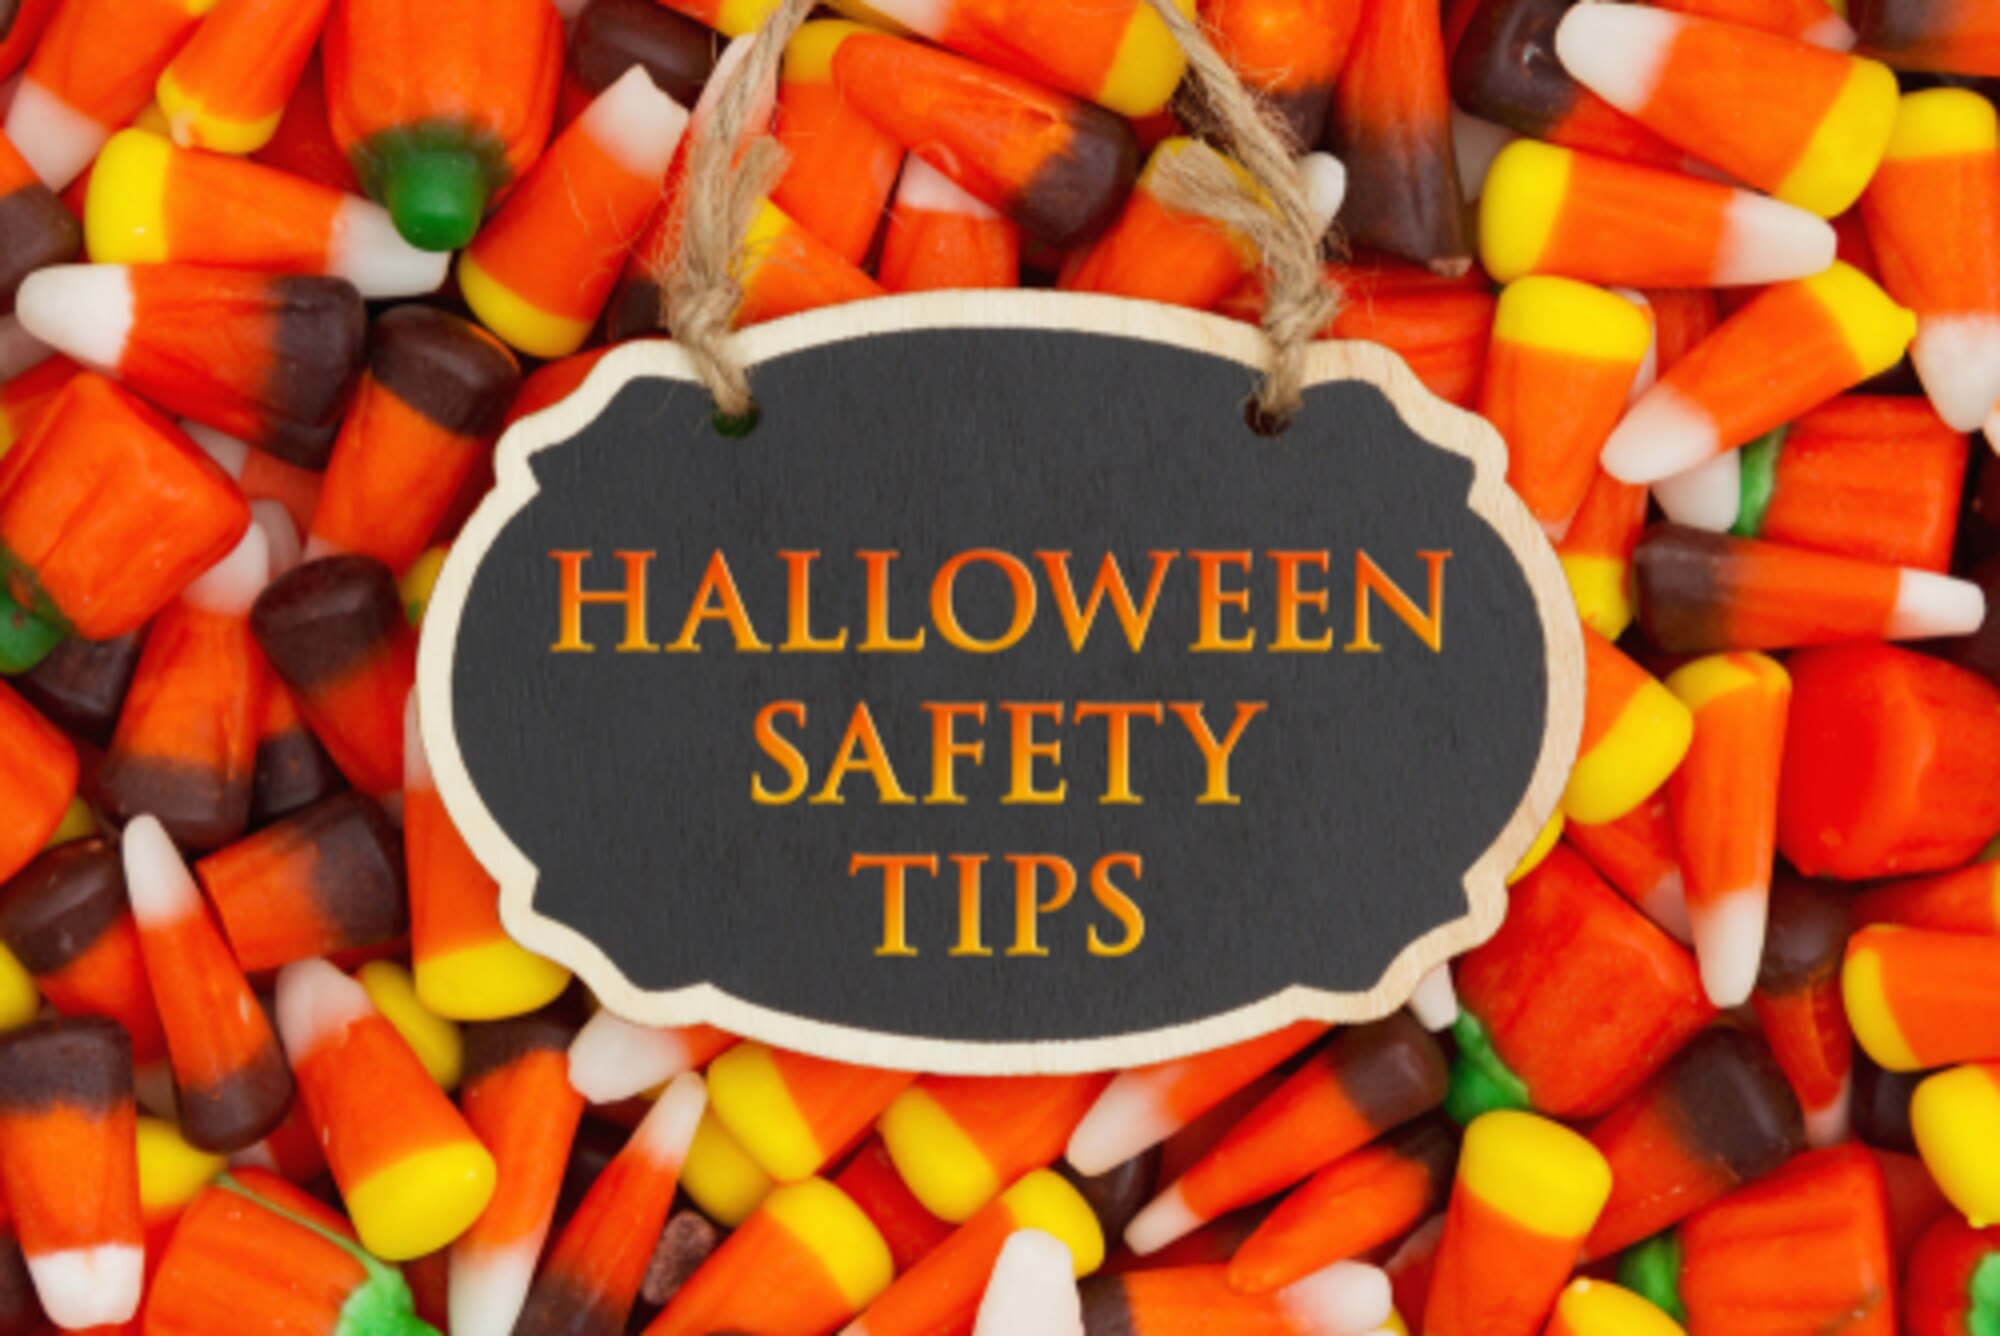 Don’t forget to have safety in your bag of tricks and treats this year